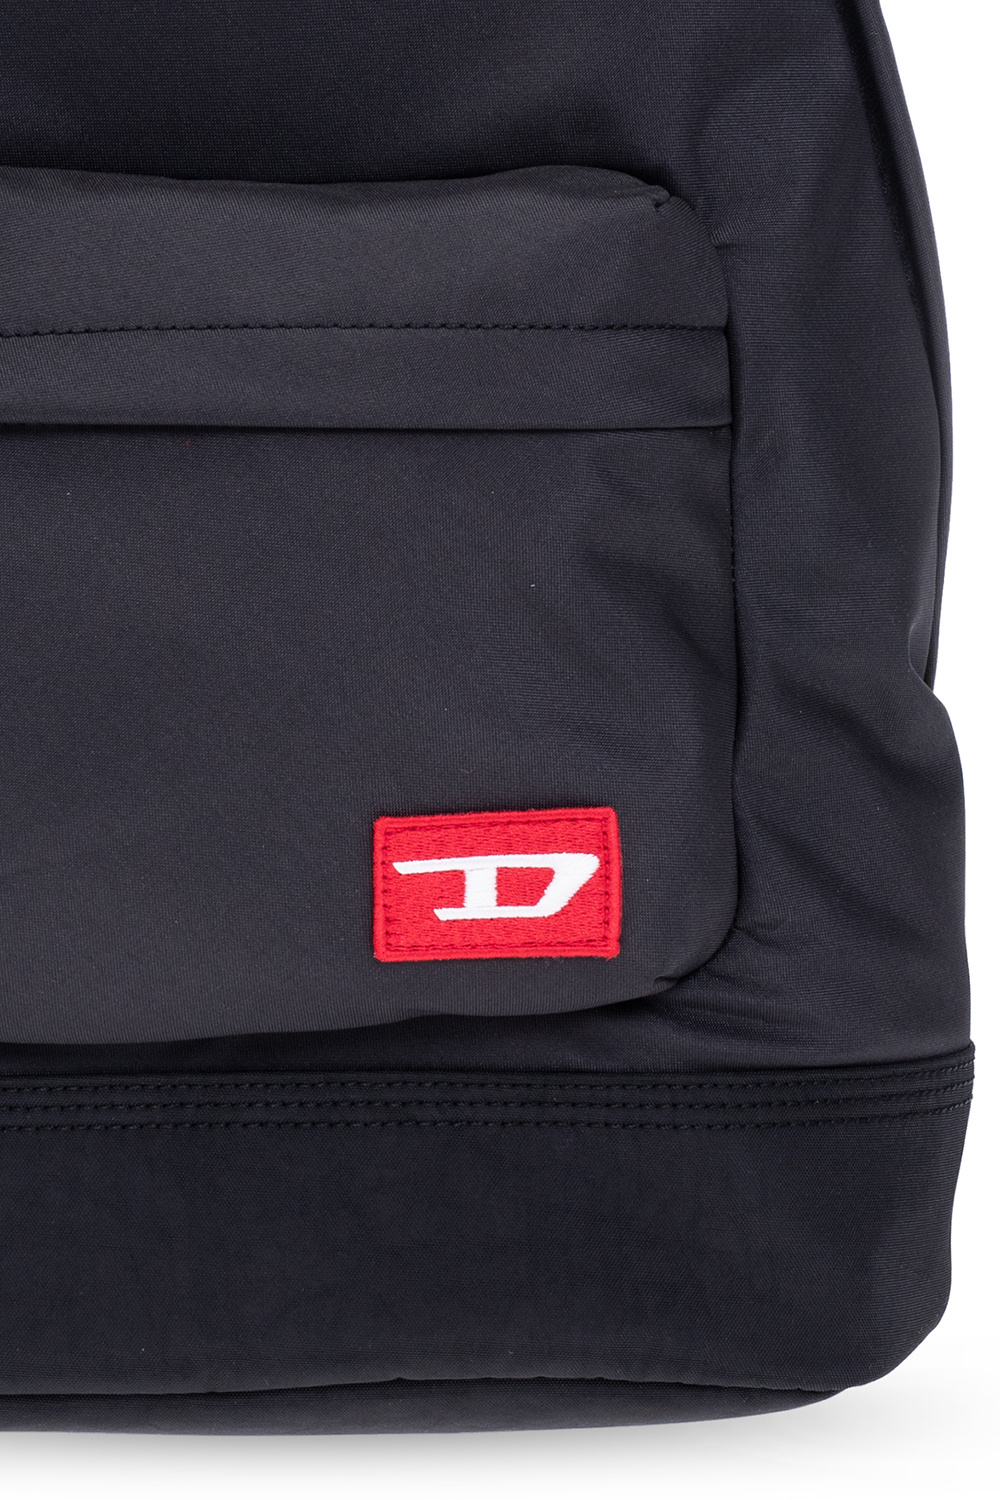 Diesel ‘Farb’ for backpack